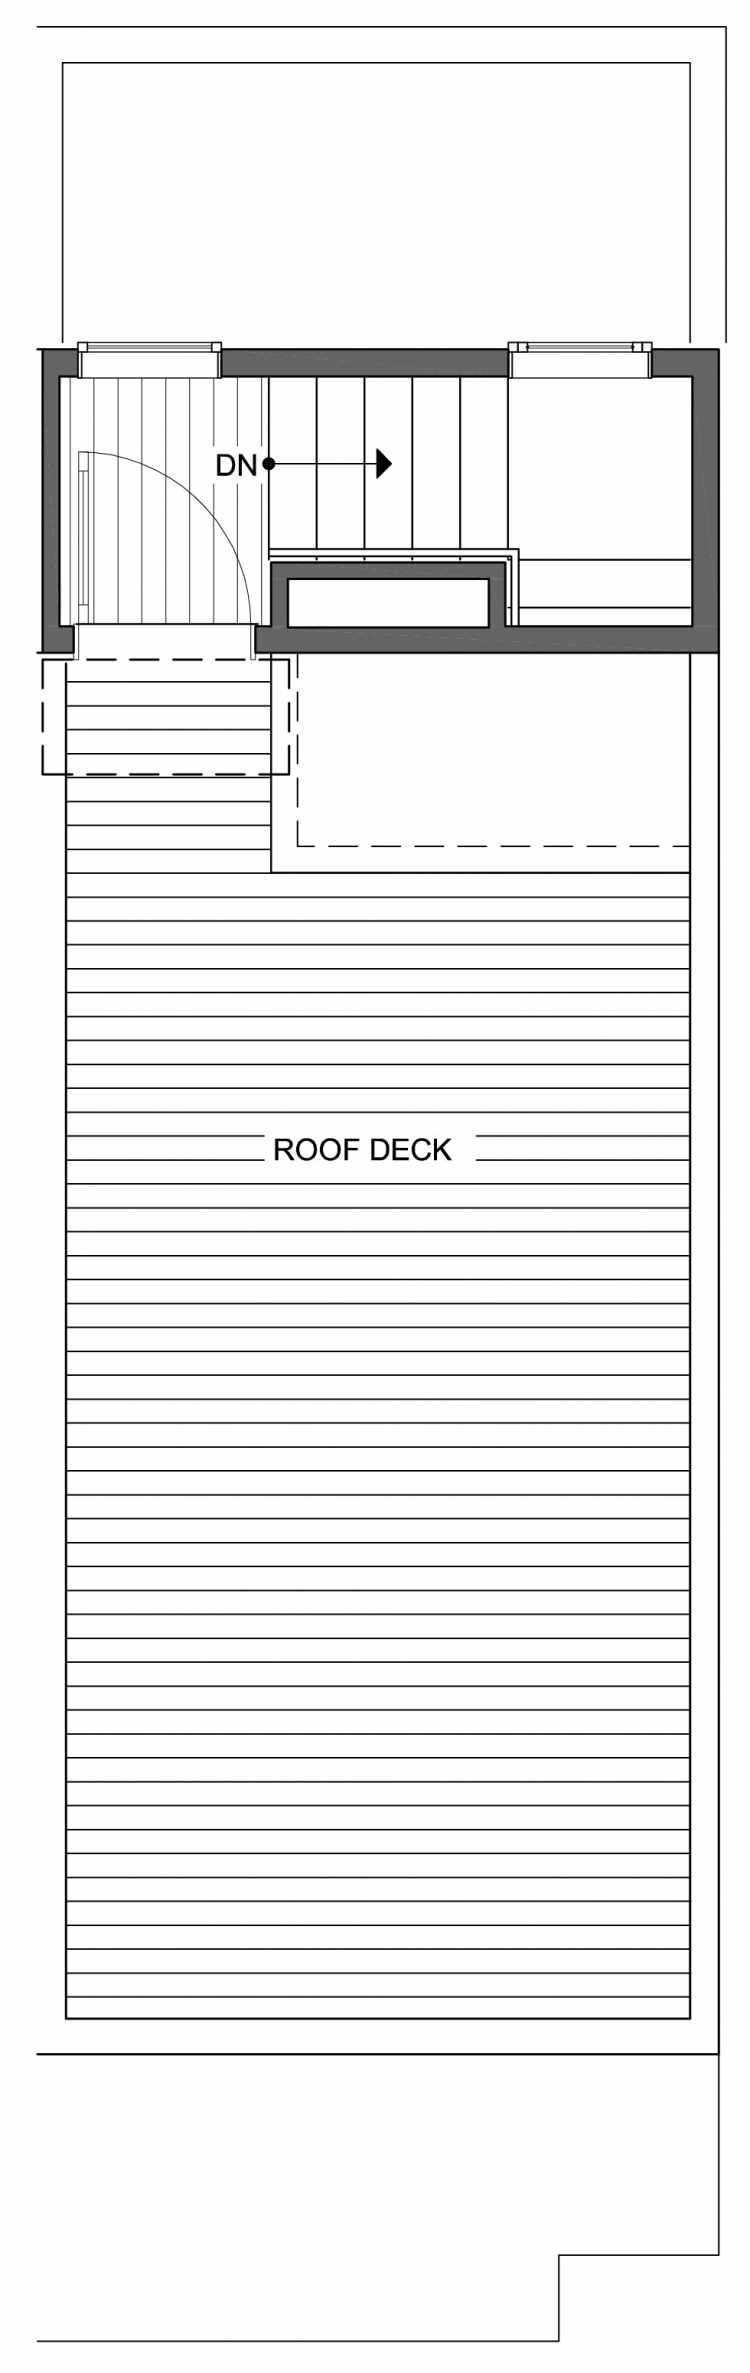 Roof Deck Floor Plan of 804 N 64th St, One of the Nino 15 West Townhomes in Fremont by Isola Homes